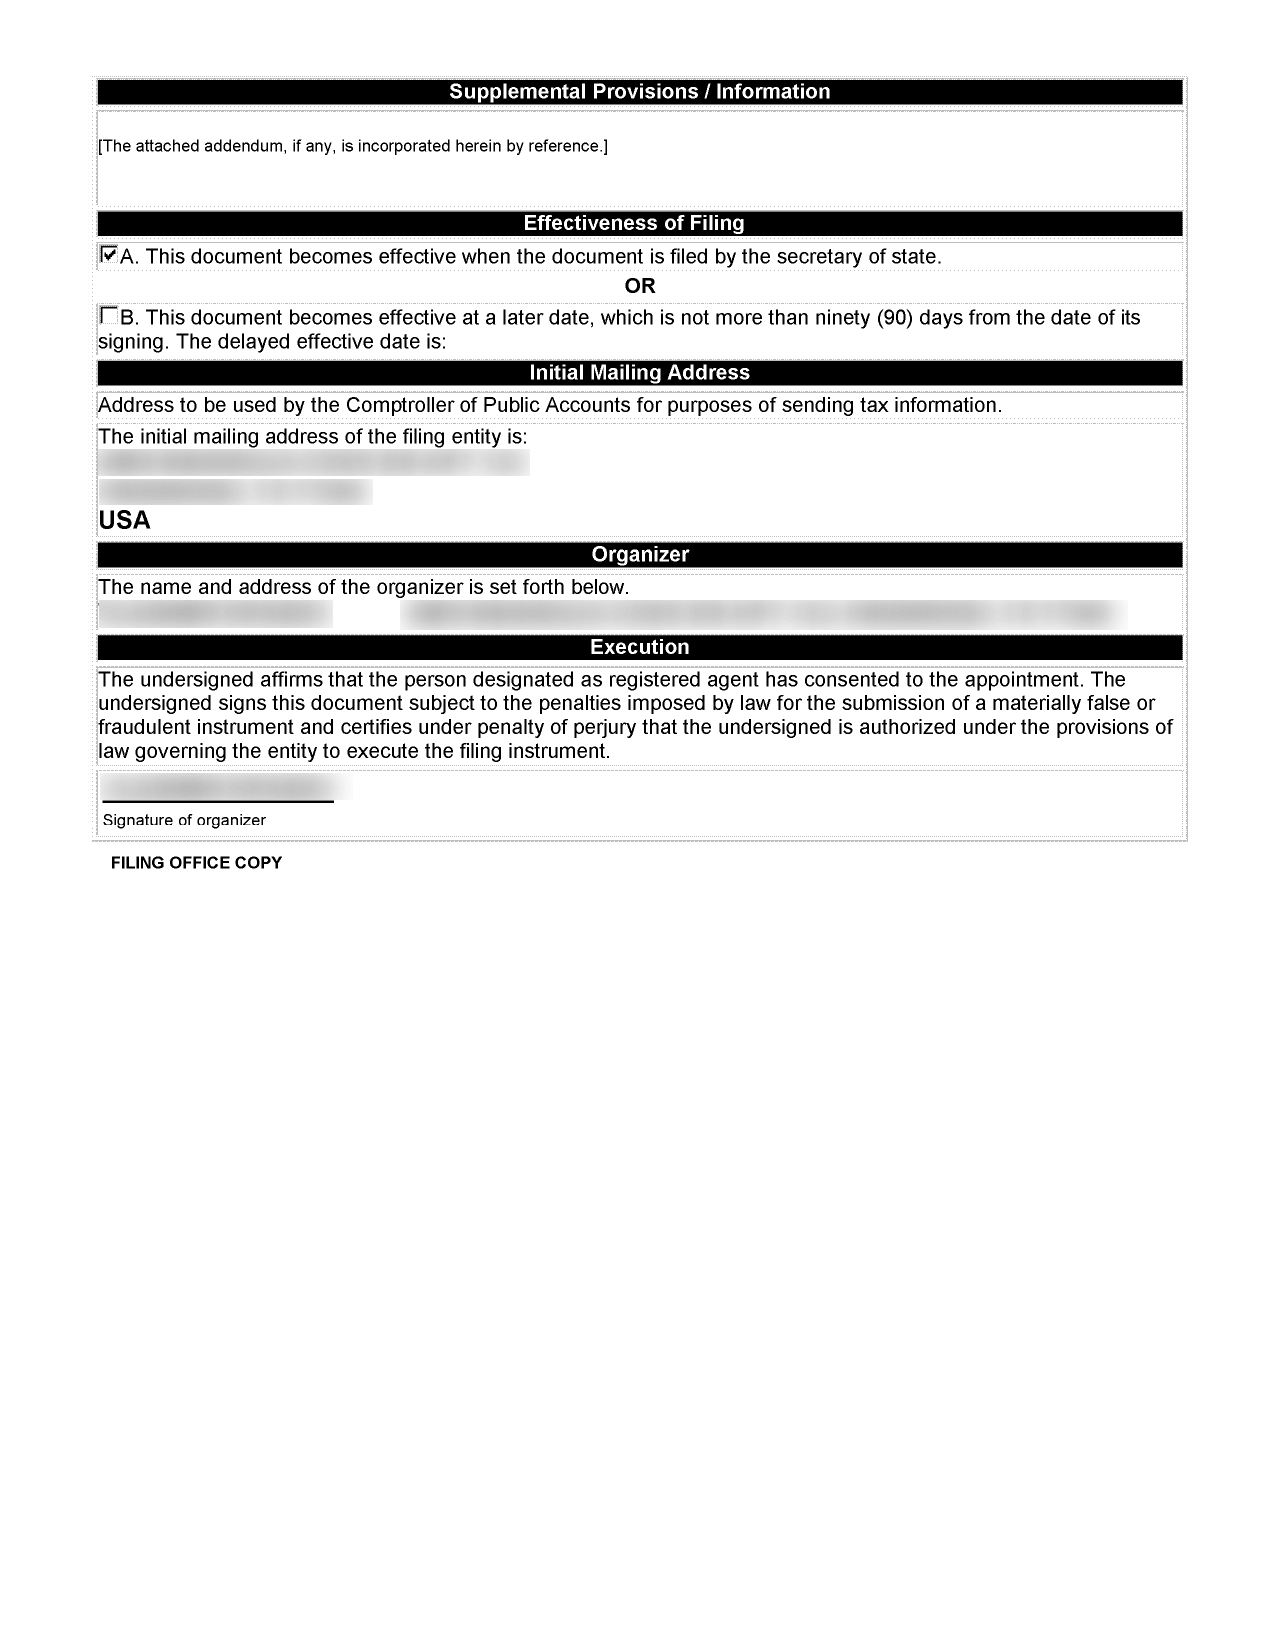 Texas Certificate of Formation Example2